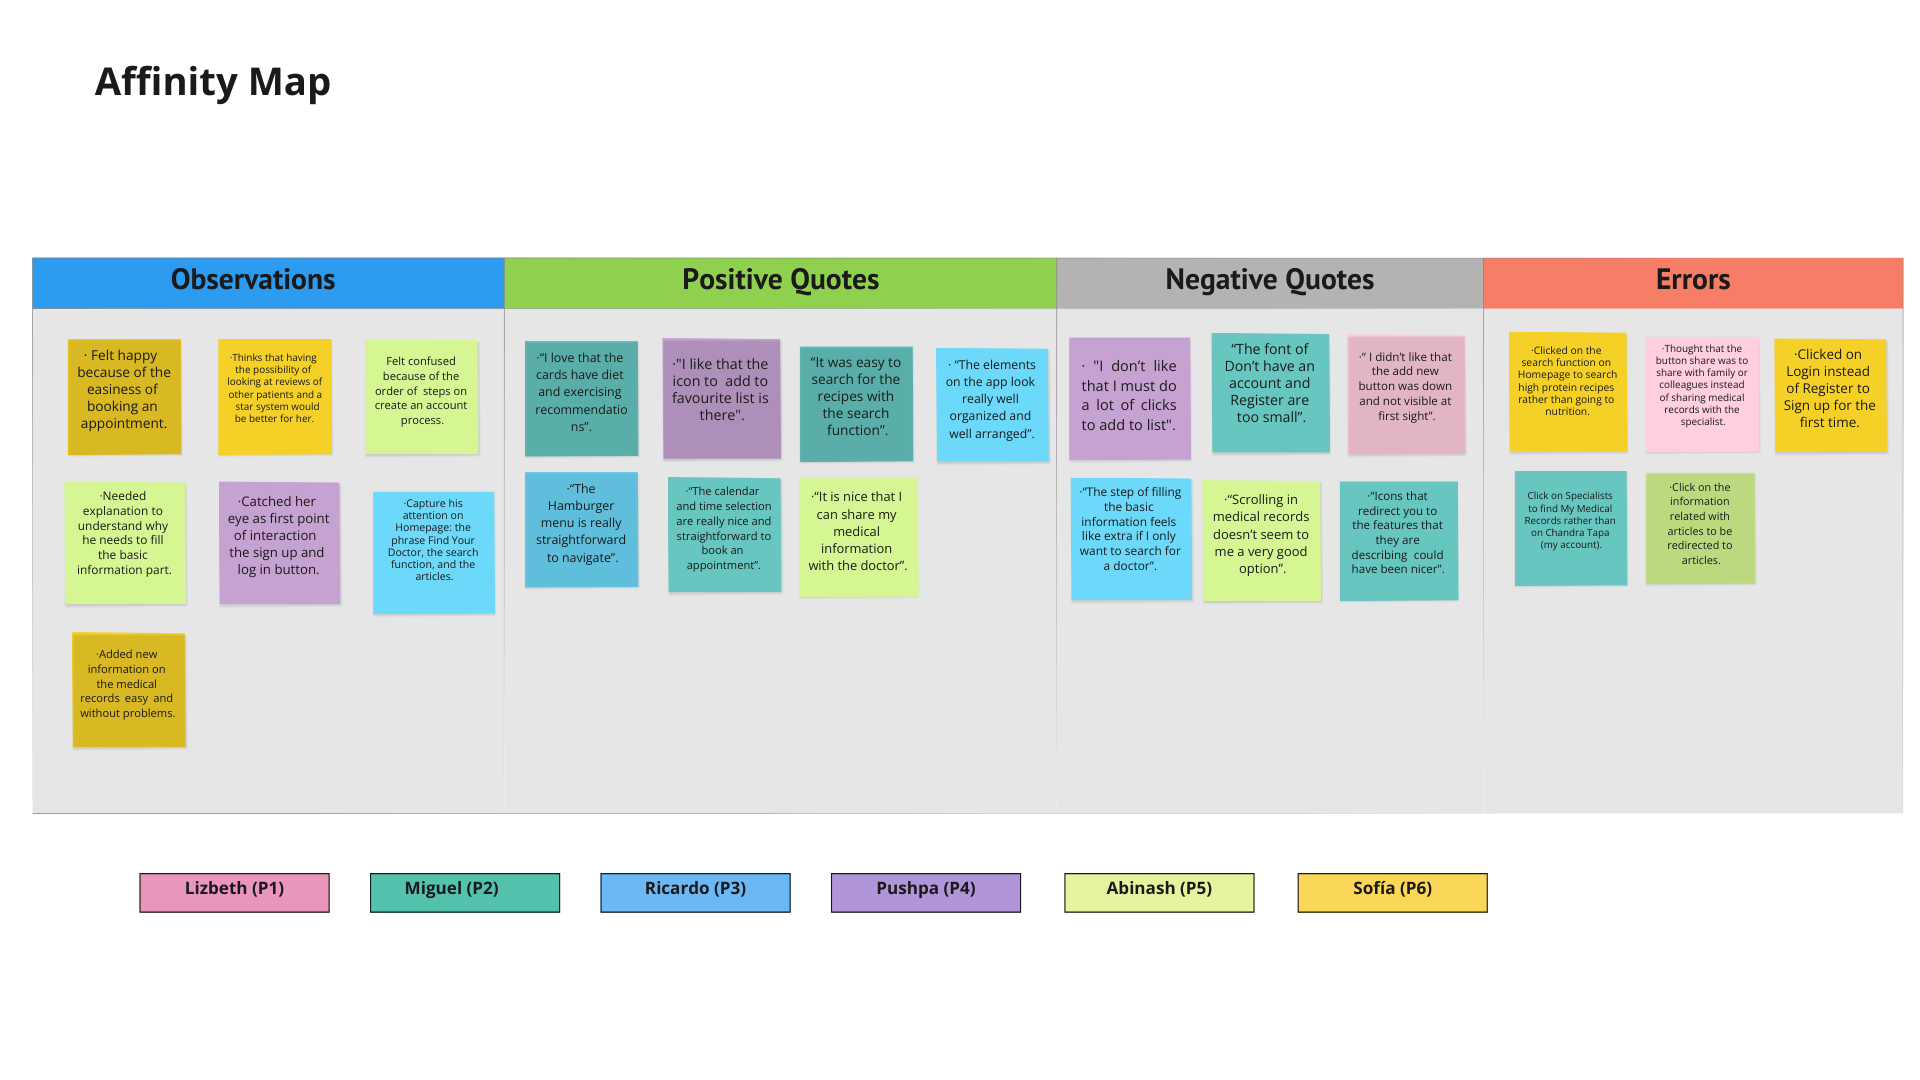 Affinity map about usability tests